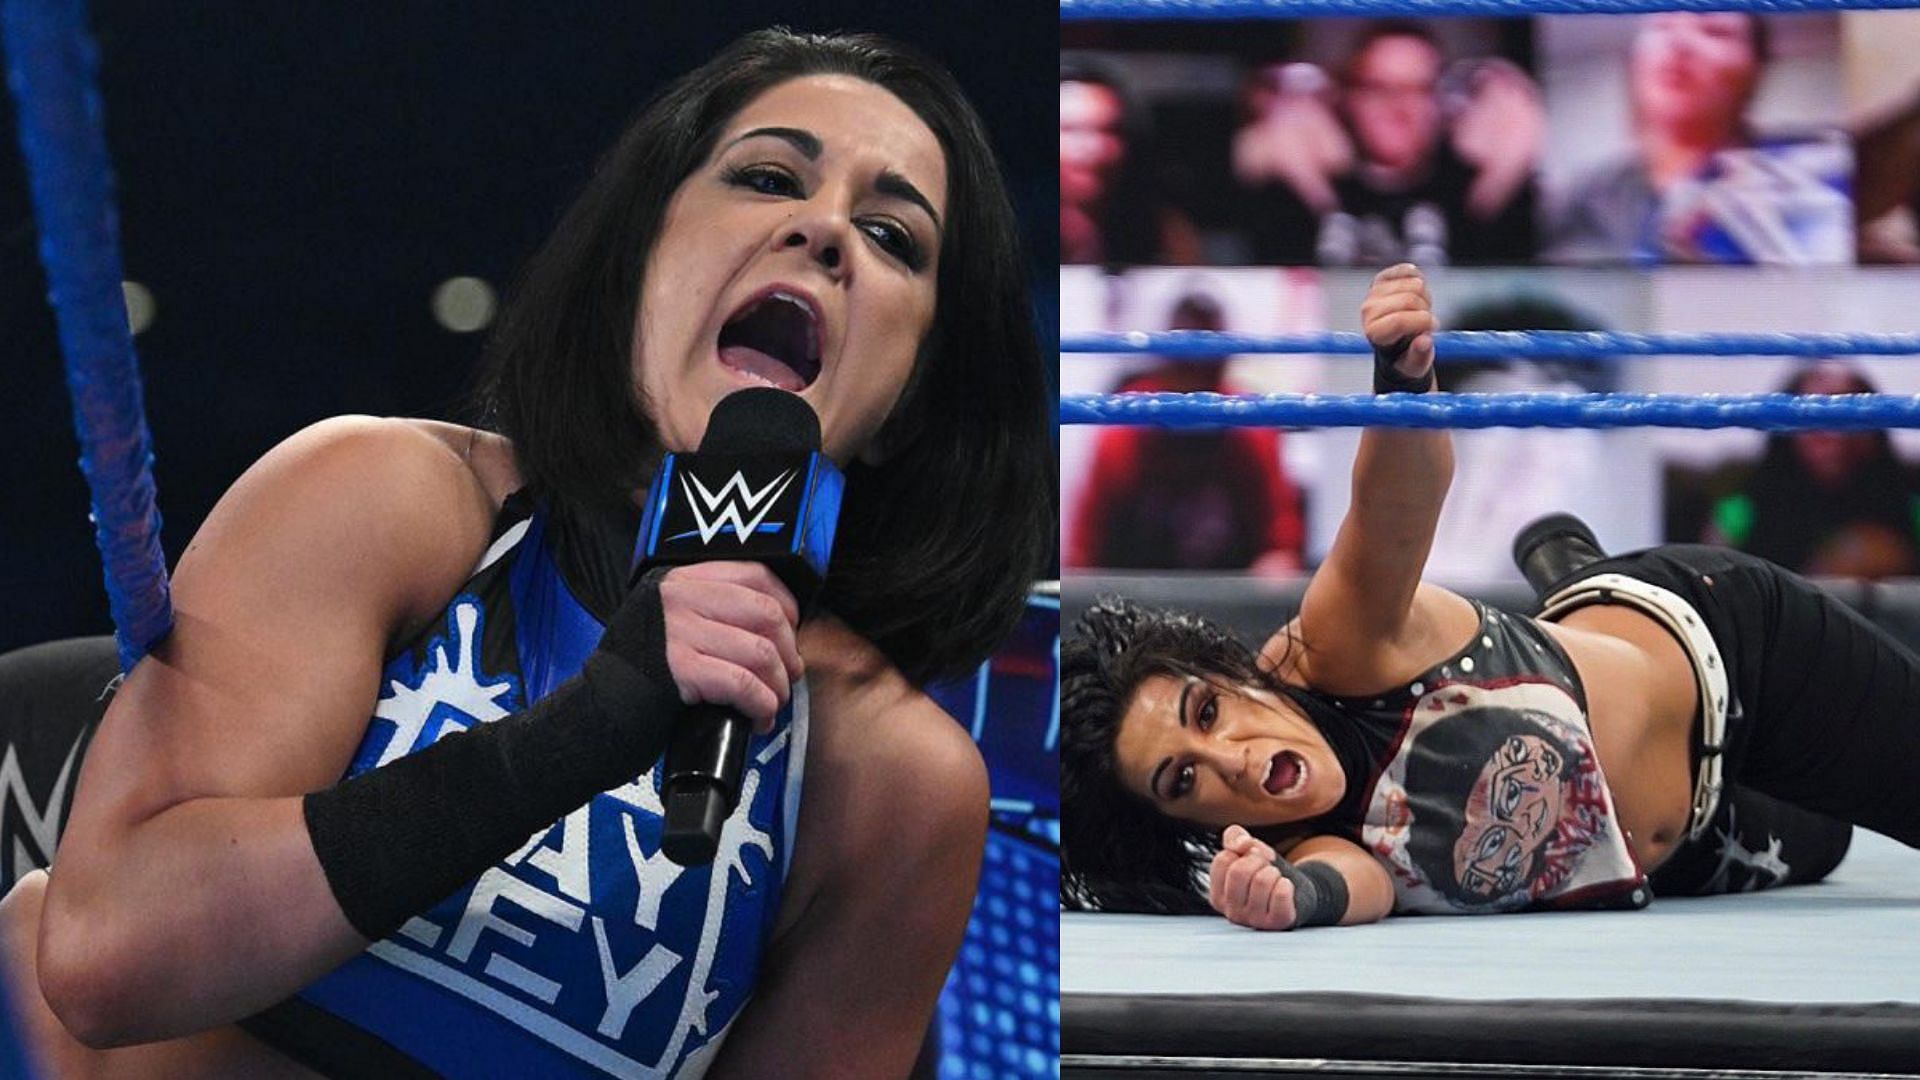 Bayley was not happy after the event